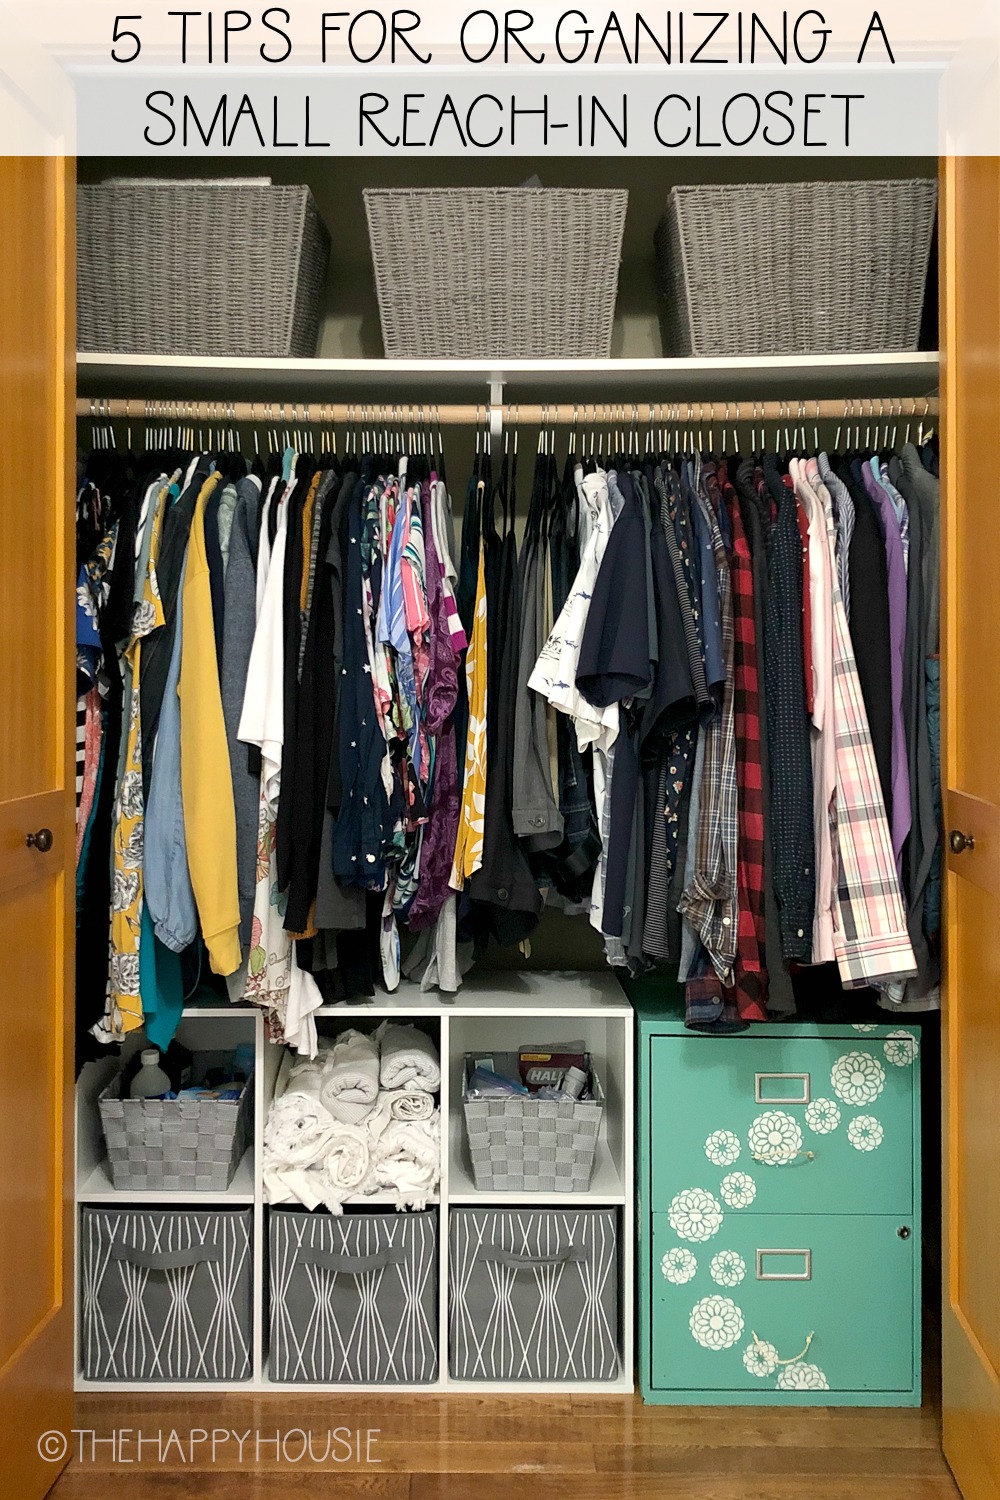 How to Make a Storage Closet More Organized and Functional